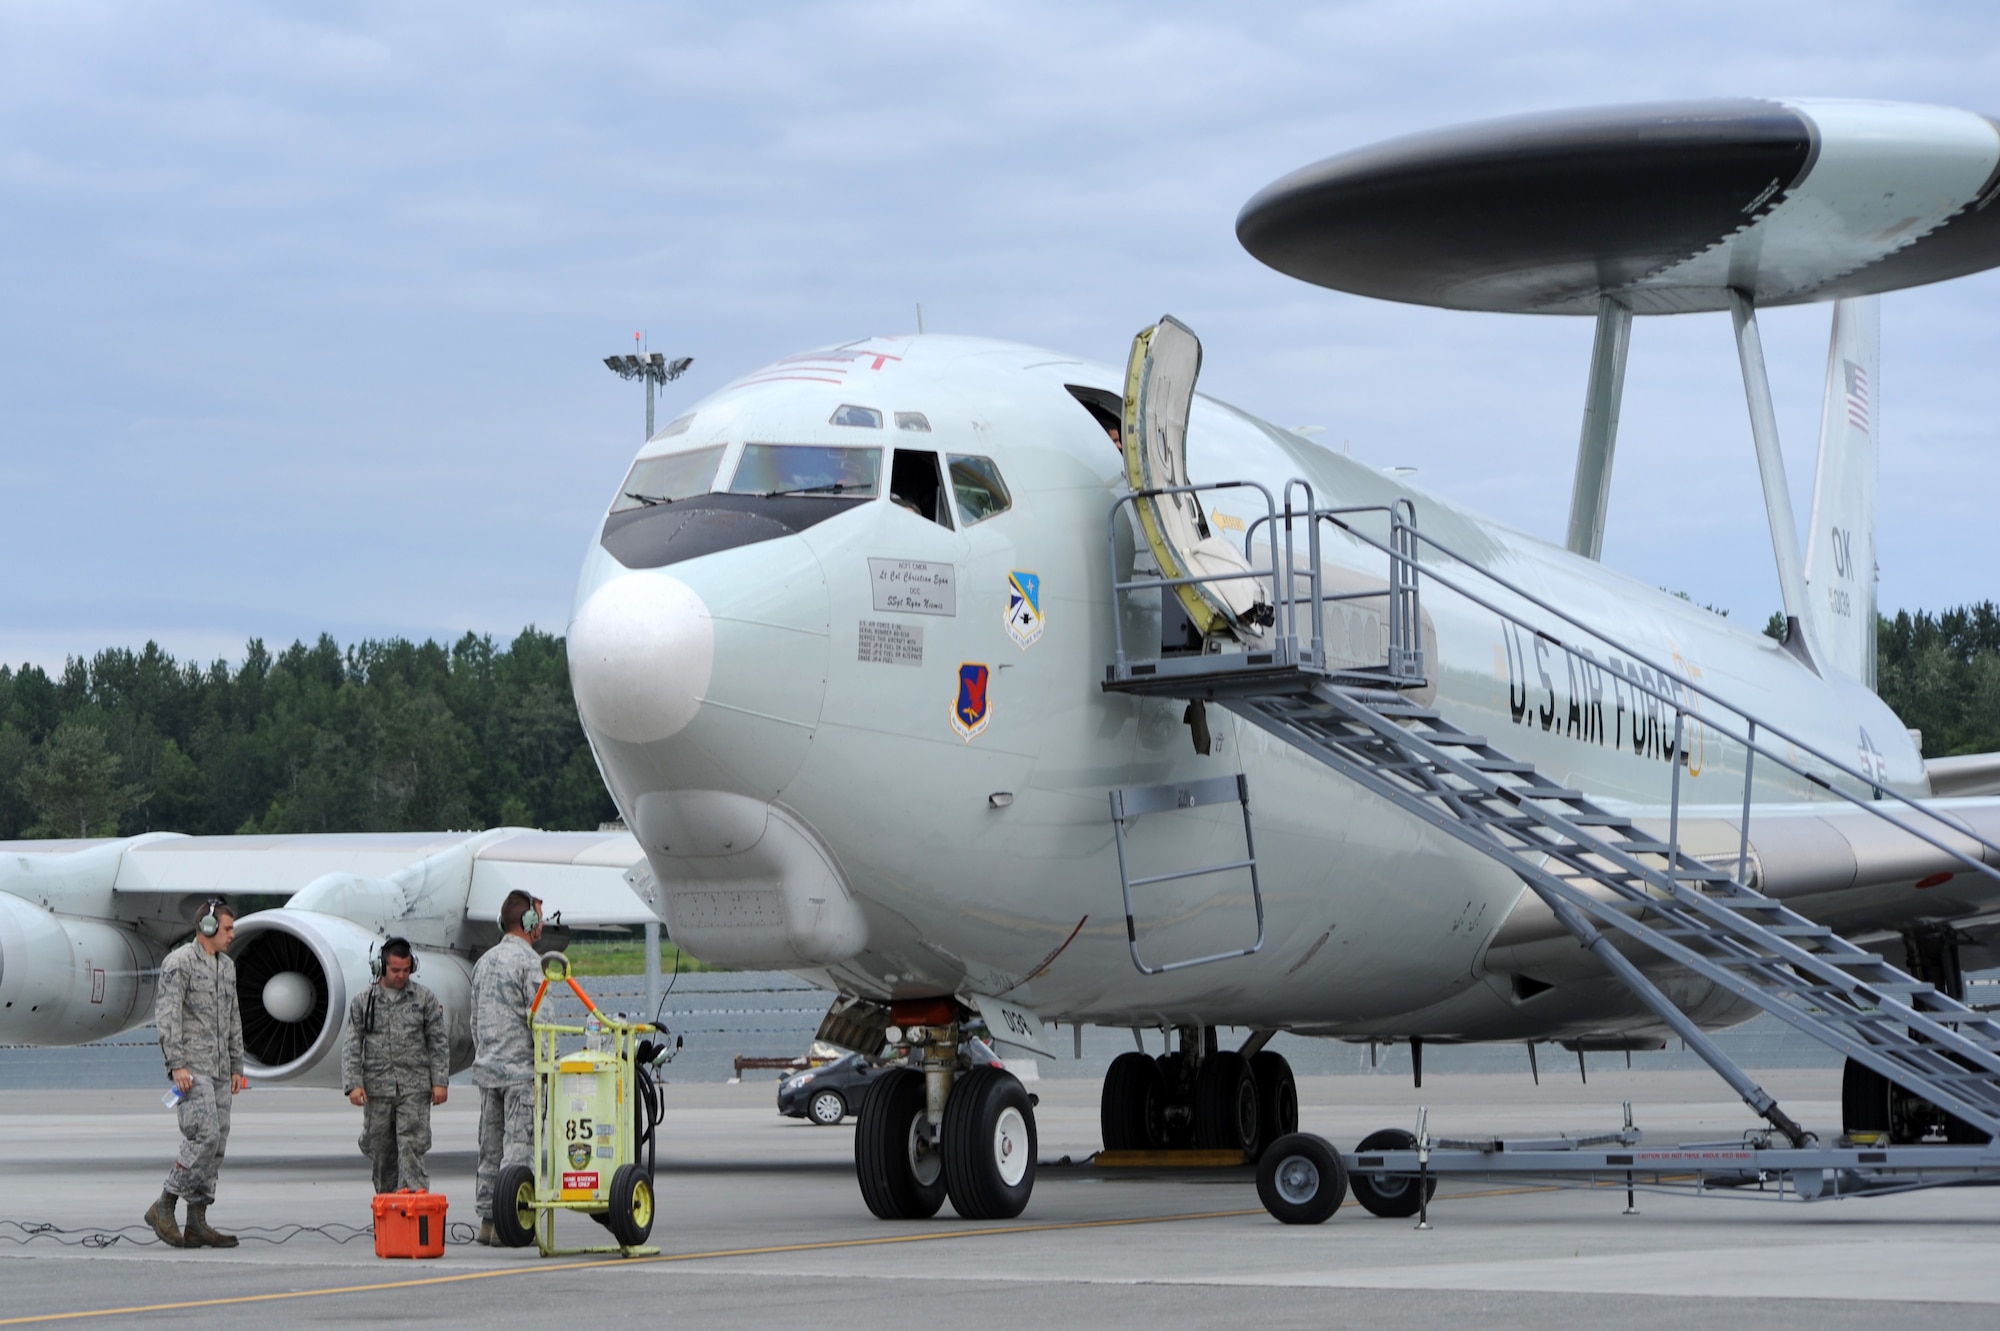 Maintenance crew members prepare a U.S. Air Force E-3G Airborne Warning and Control System aircraft for take off during Exercise Northern Edge June 25, 2015. Thousands of service members from all the branch services including active duty, Reserve and National Guard units participated. (U.S. Air Force photo/ Staff Sgt. William Banton)